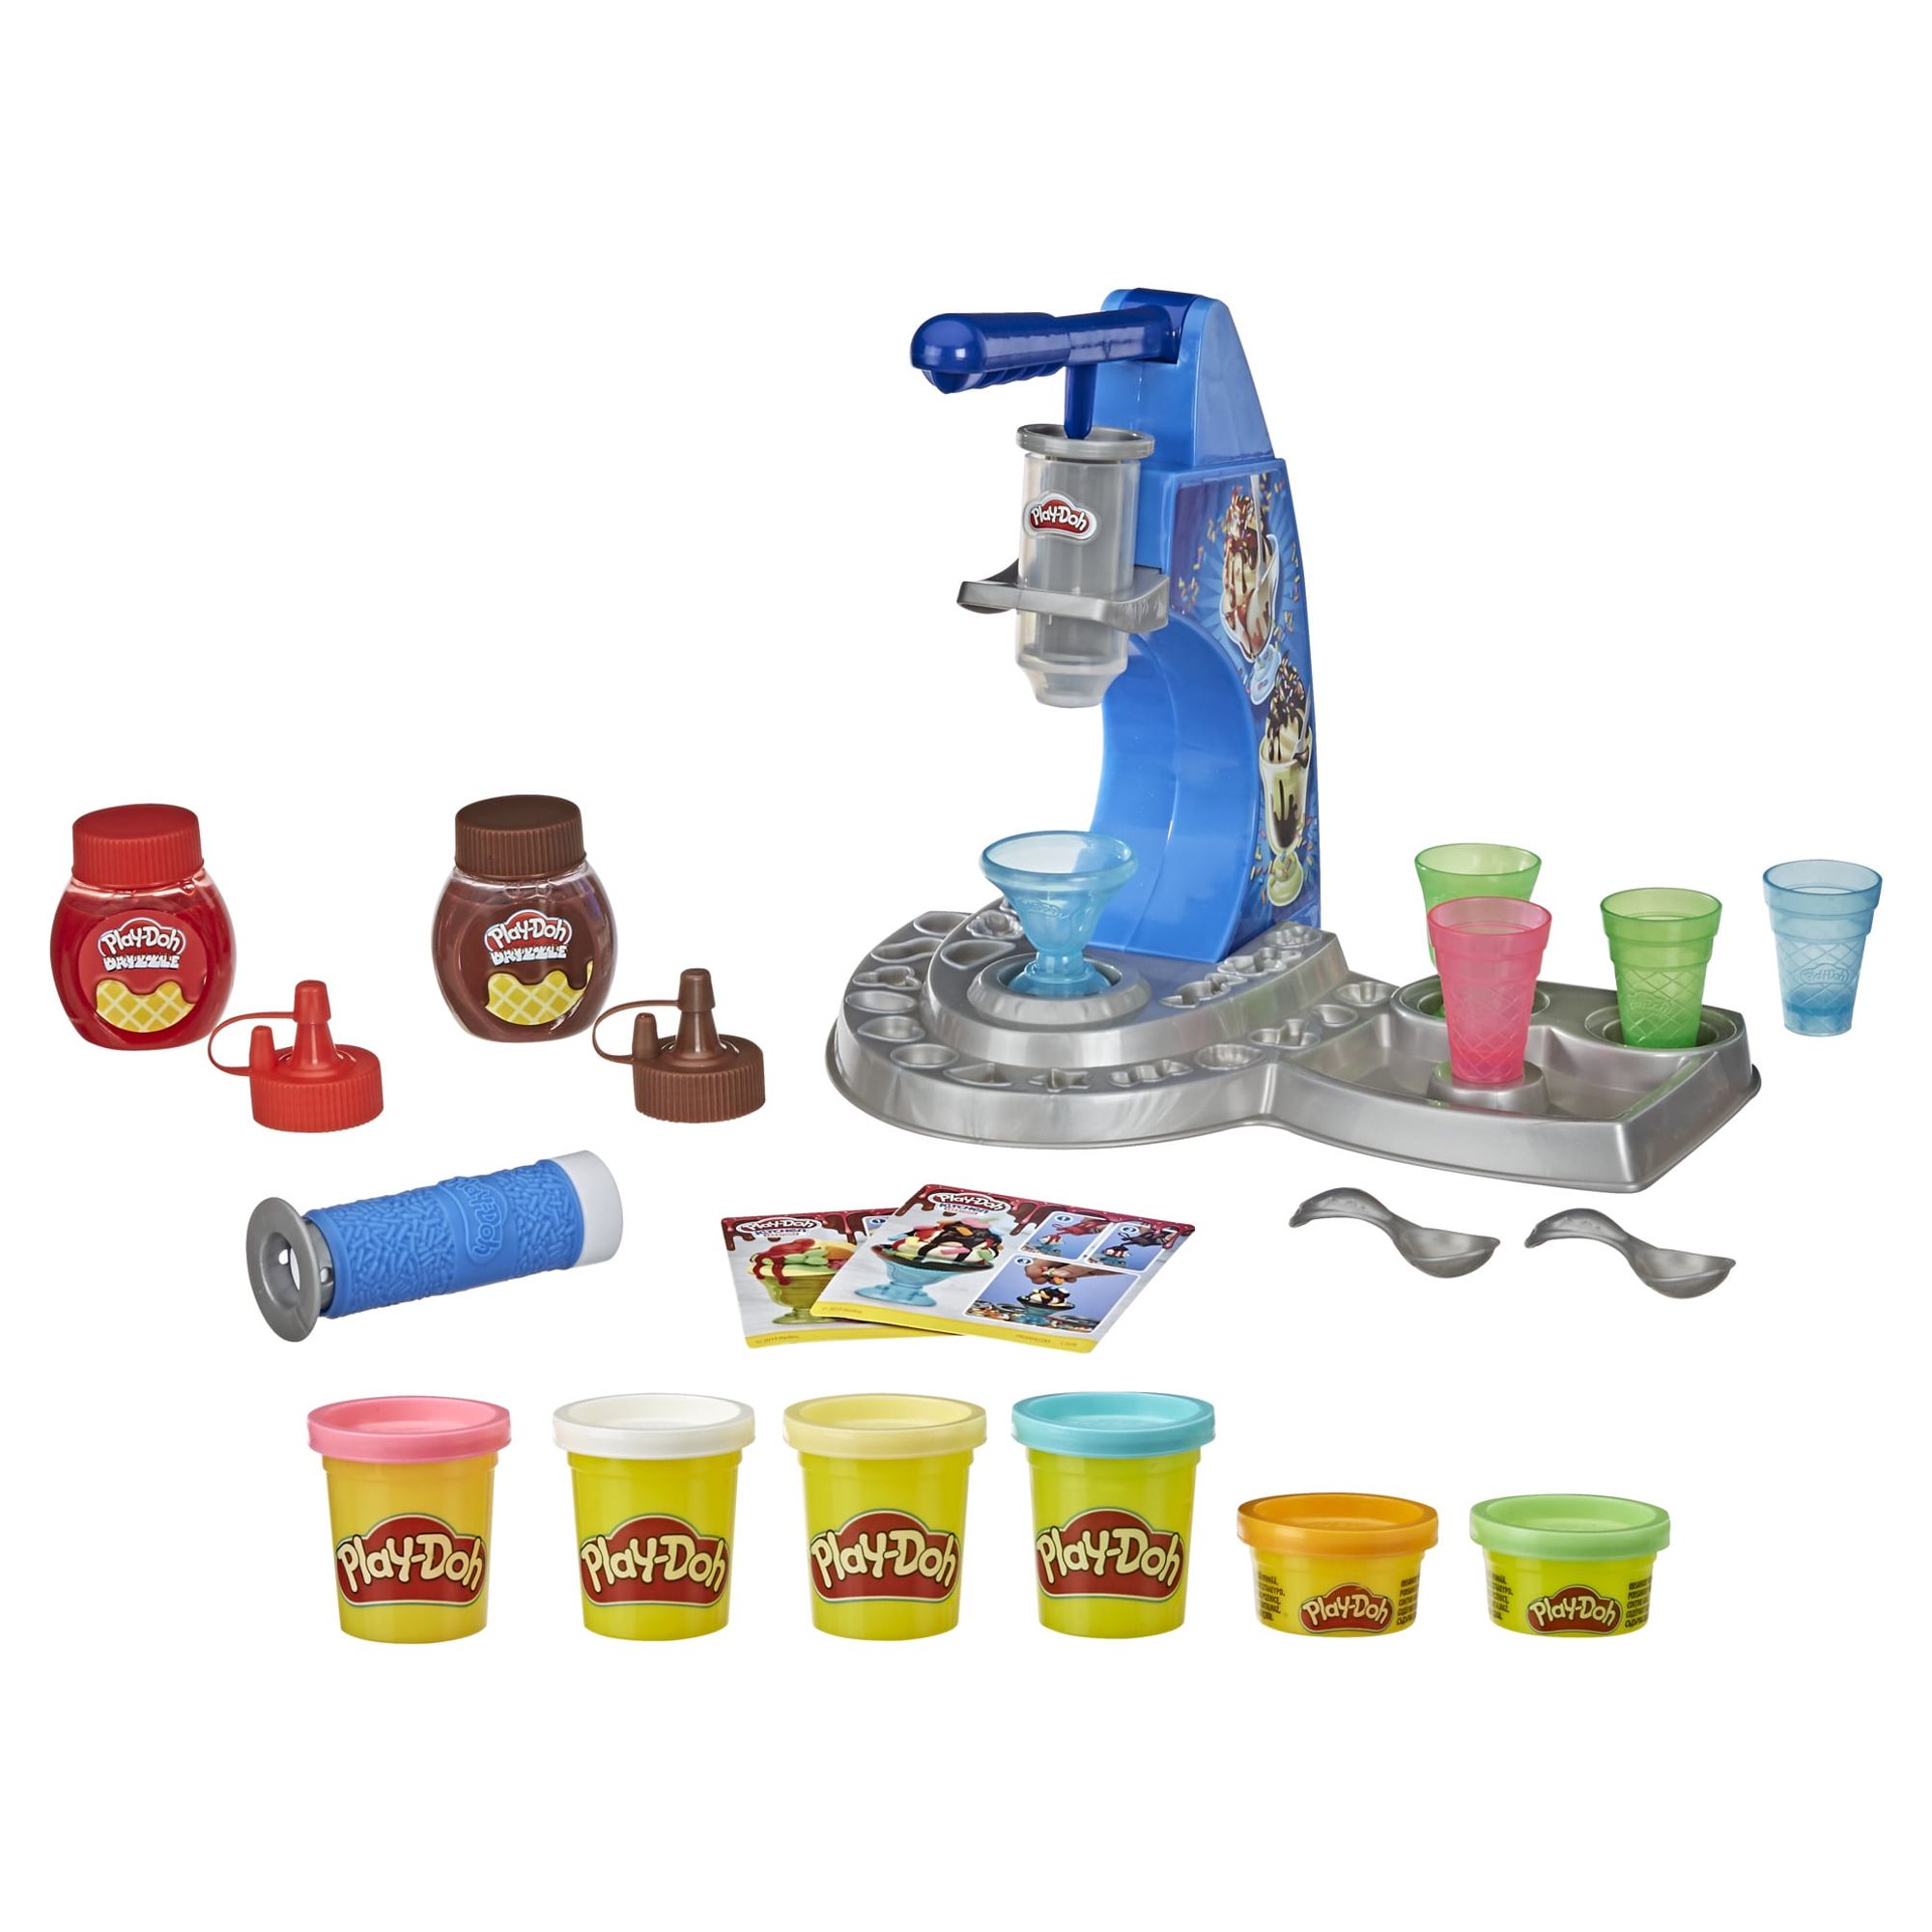 Play-Doh Kitchen Creations Drizzy Ice Cream Play Dough Set - 6 Color (6 Piece) - image 3 of 12